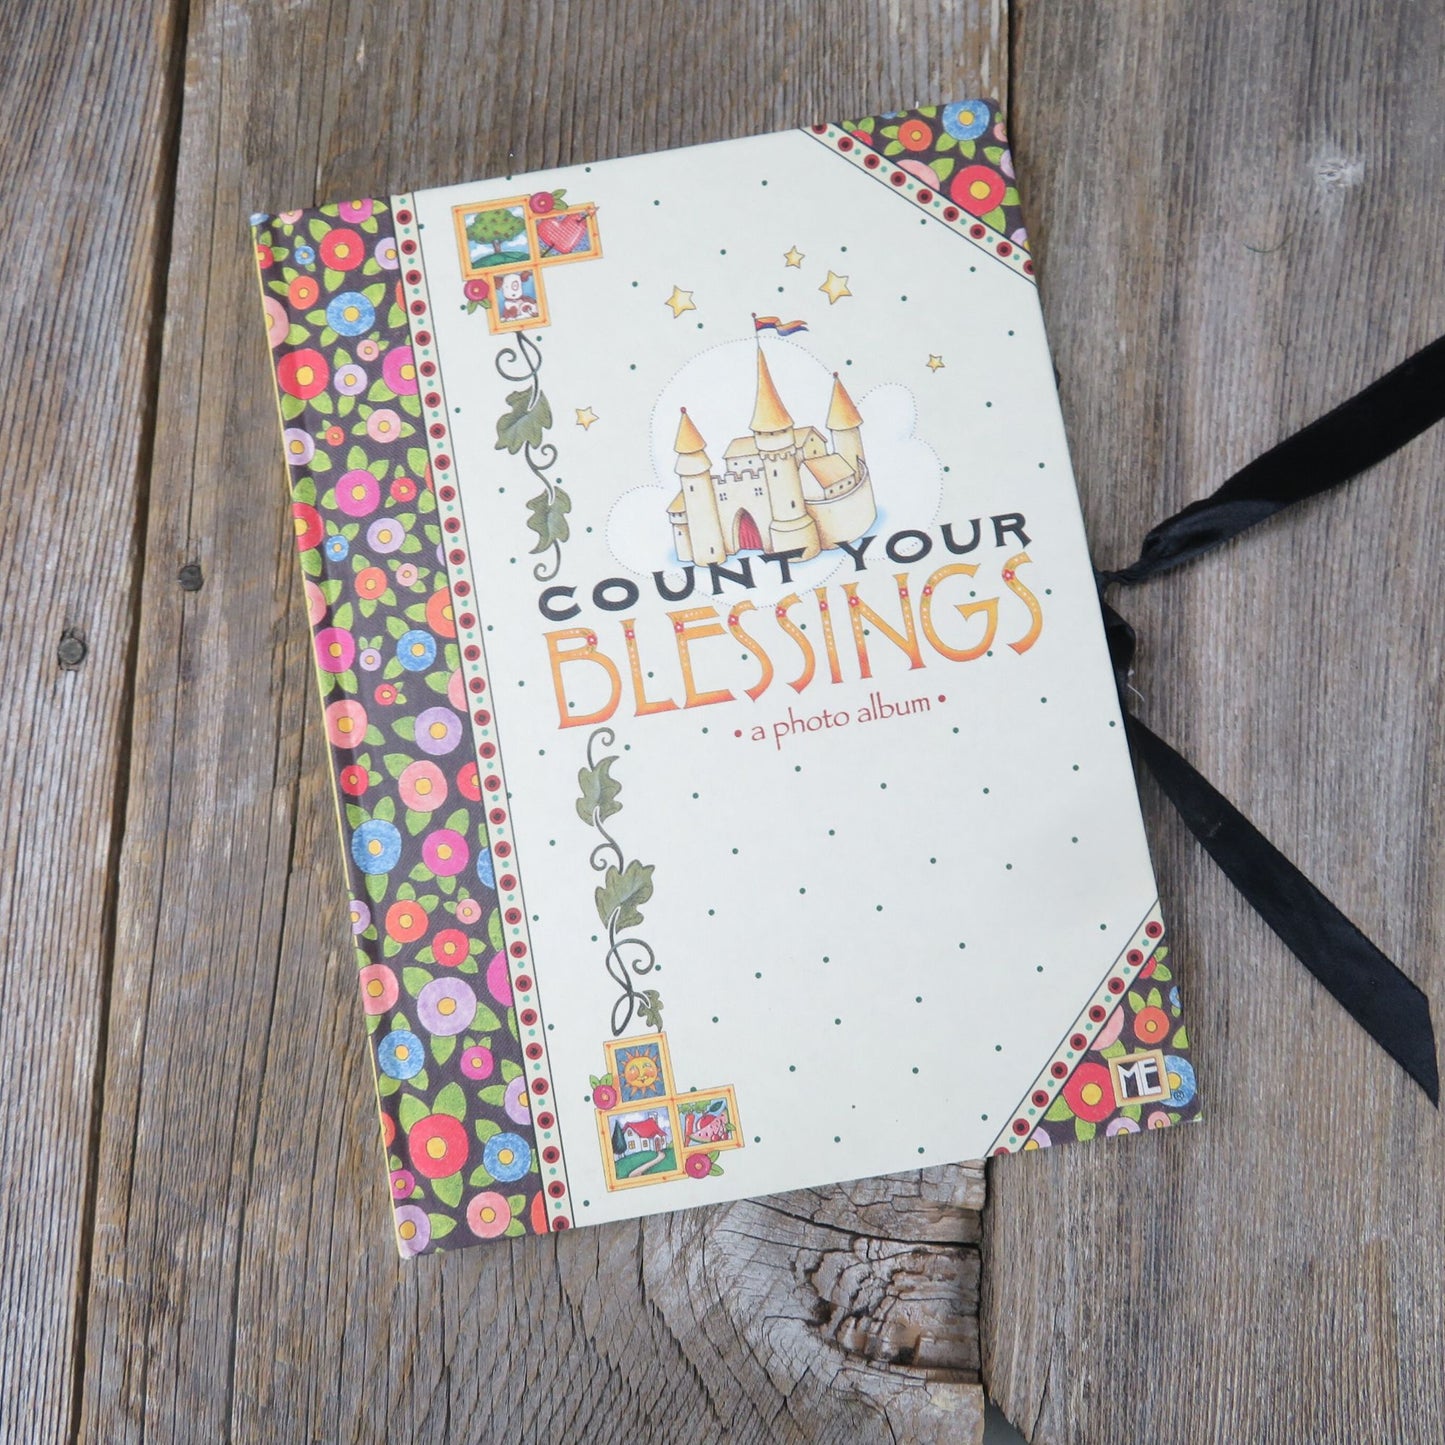 Mary Engelbreit Photo Album Count Your Blessings Memory Keeper 1999